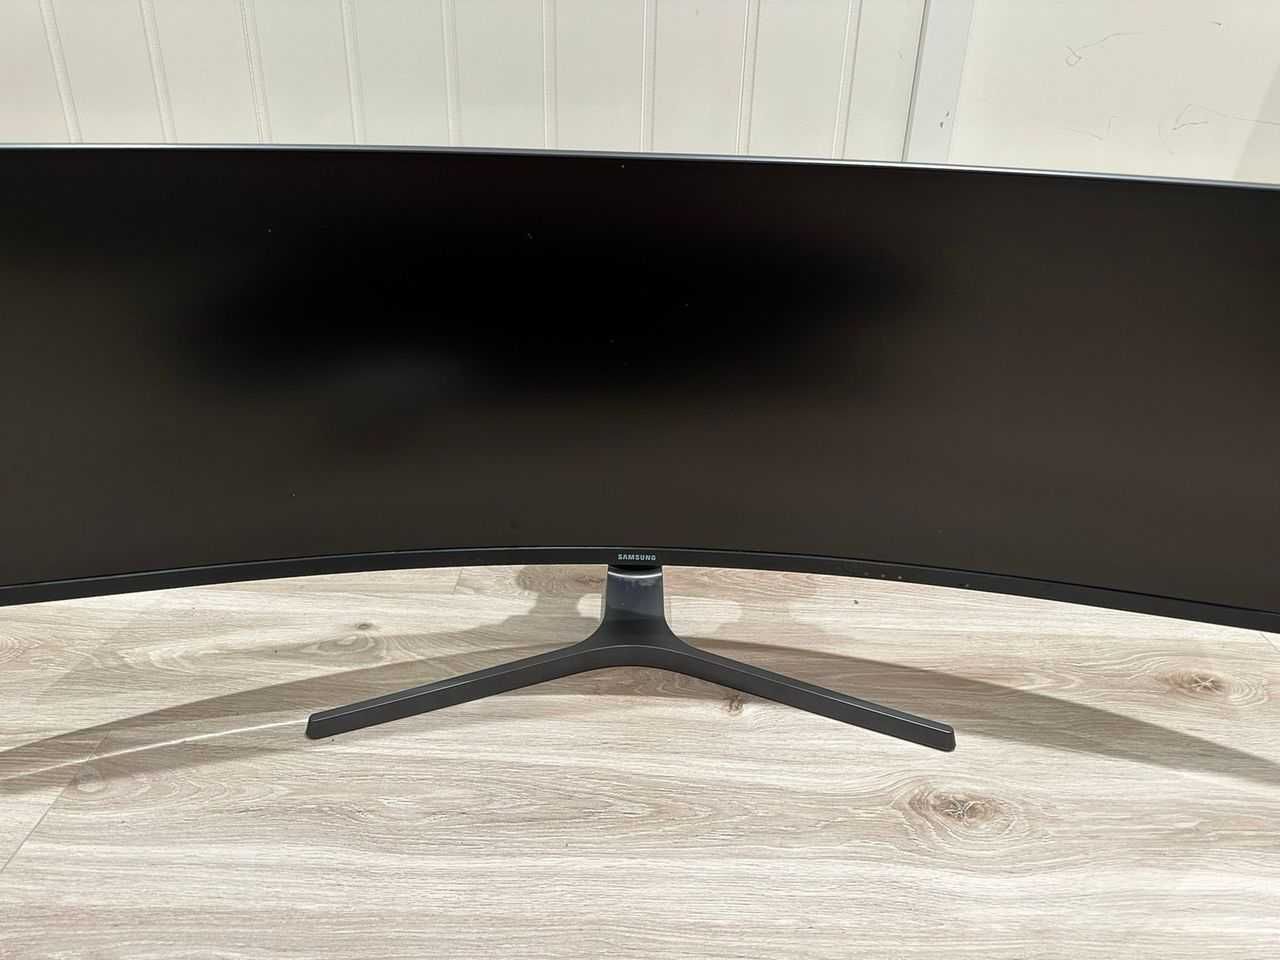 SAMSUNG ODYSSEY C49HG90 49 Monitor QLED HDR Gaming Curved